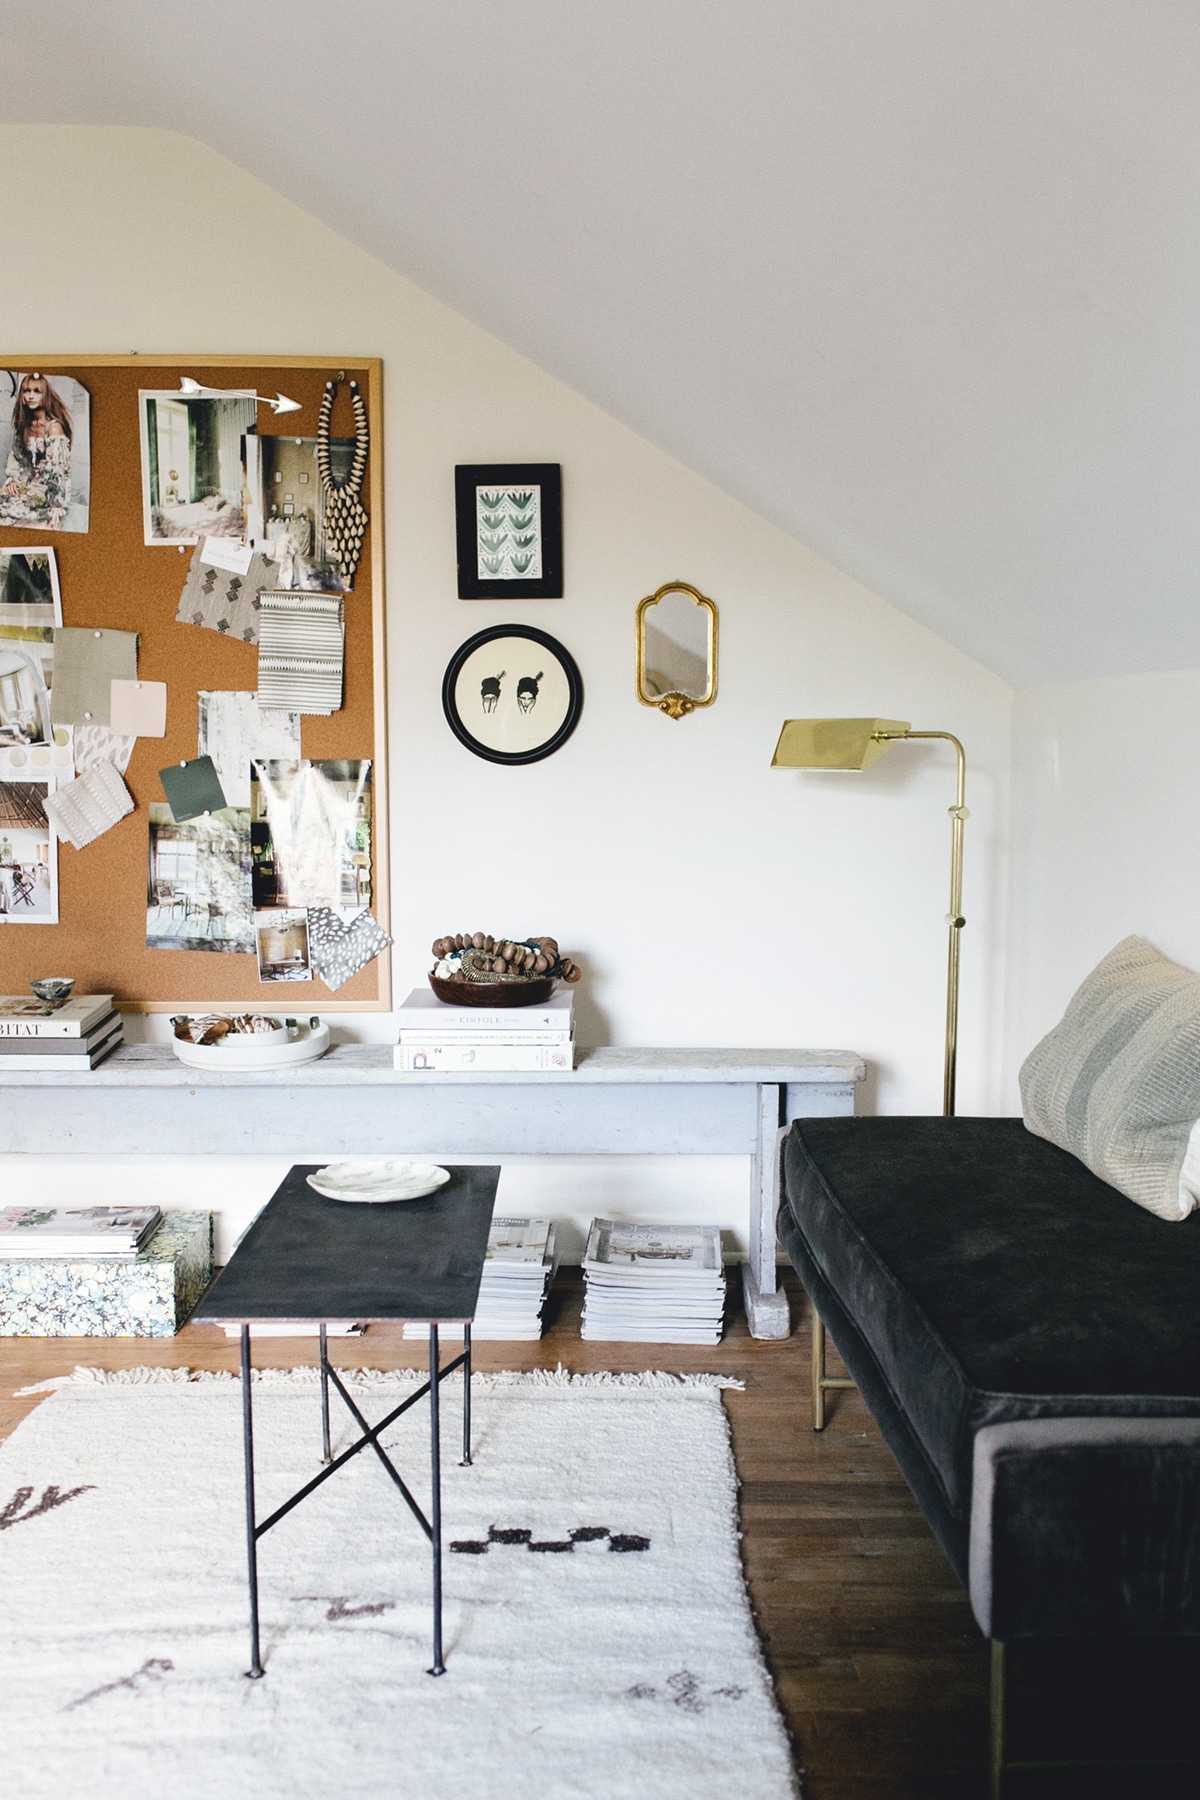 converting an attic into a creative home office space | coco kelley